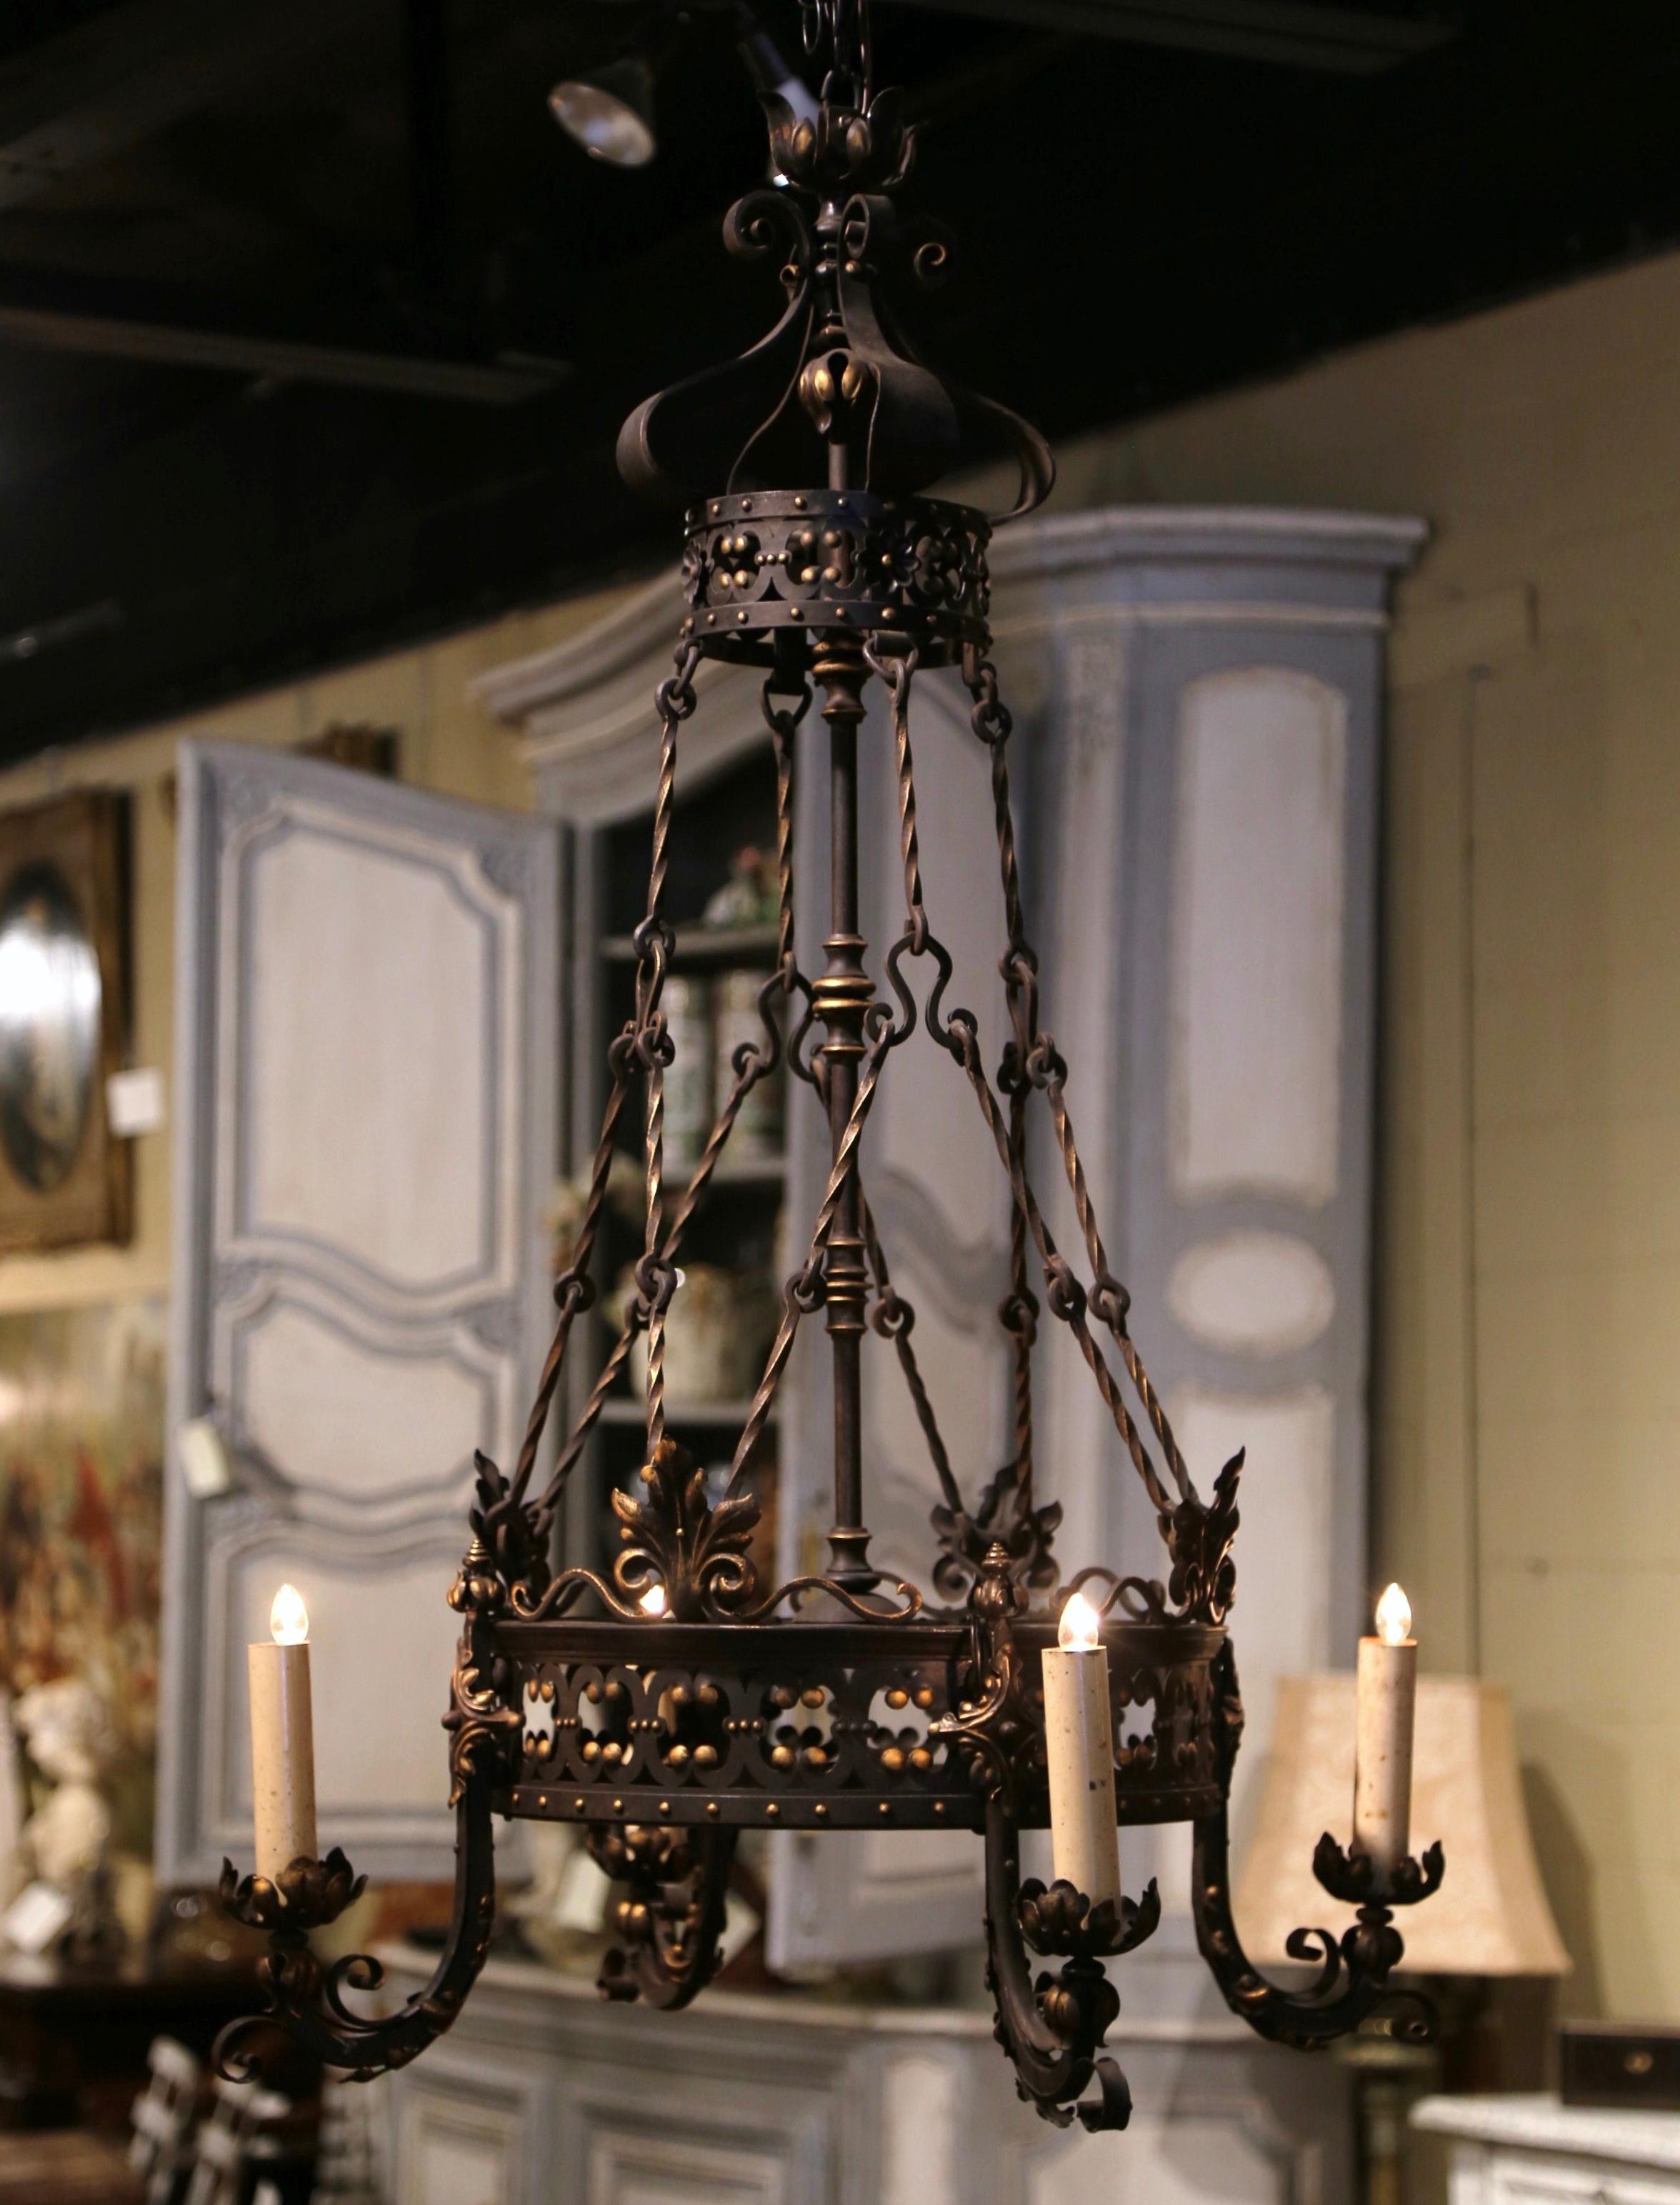 This intricate antique iron light fixture was forged in France circa 1870. Round in shape, the Gothic chandelier features a circular crown decorated with acanthus leaf and rose flower motifs in high relief around the perimeter. The tall chandelier